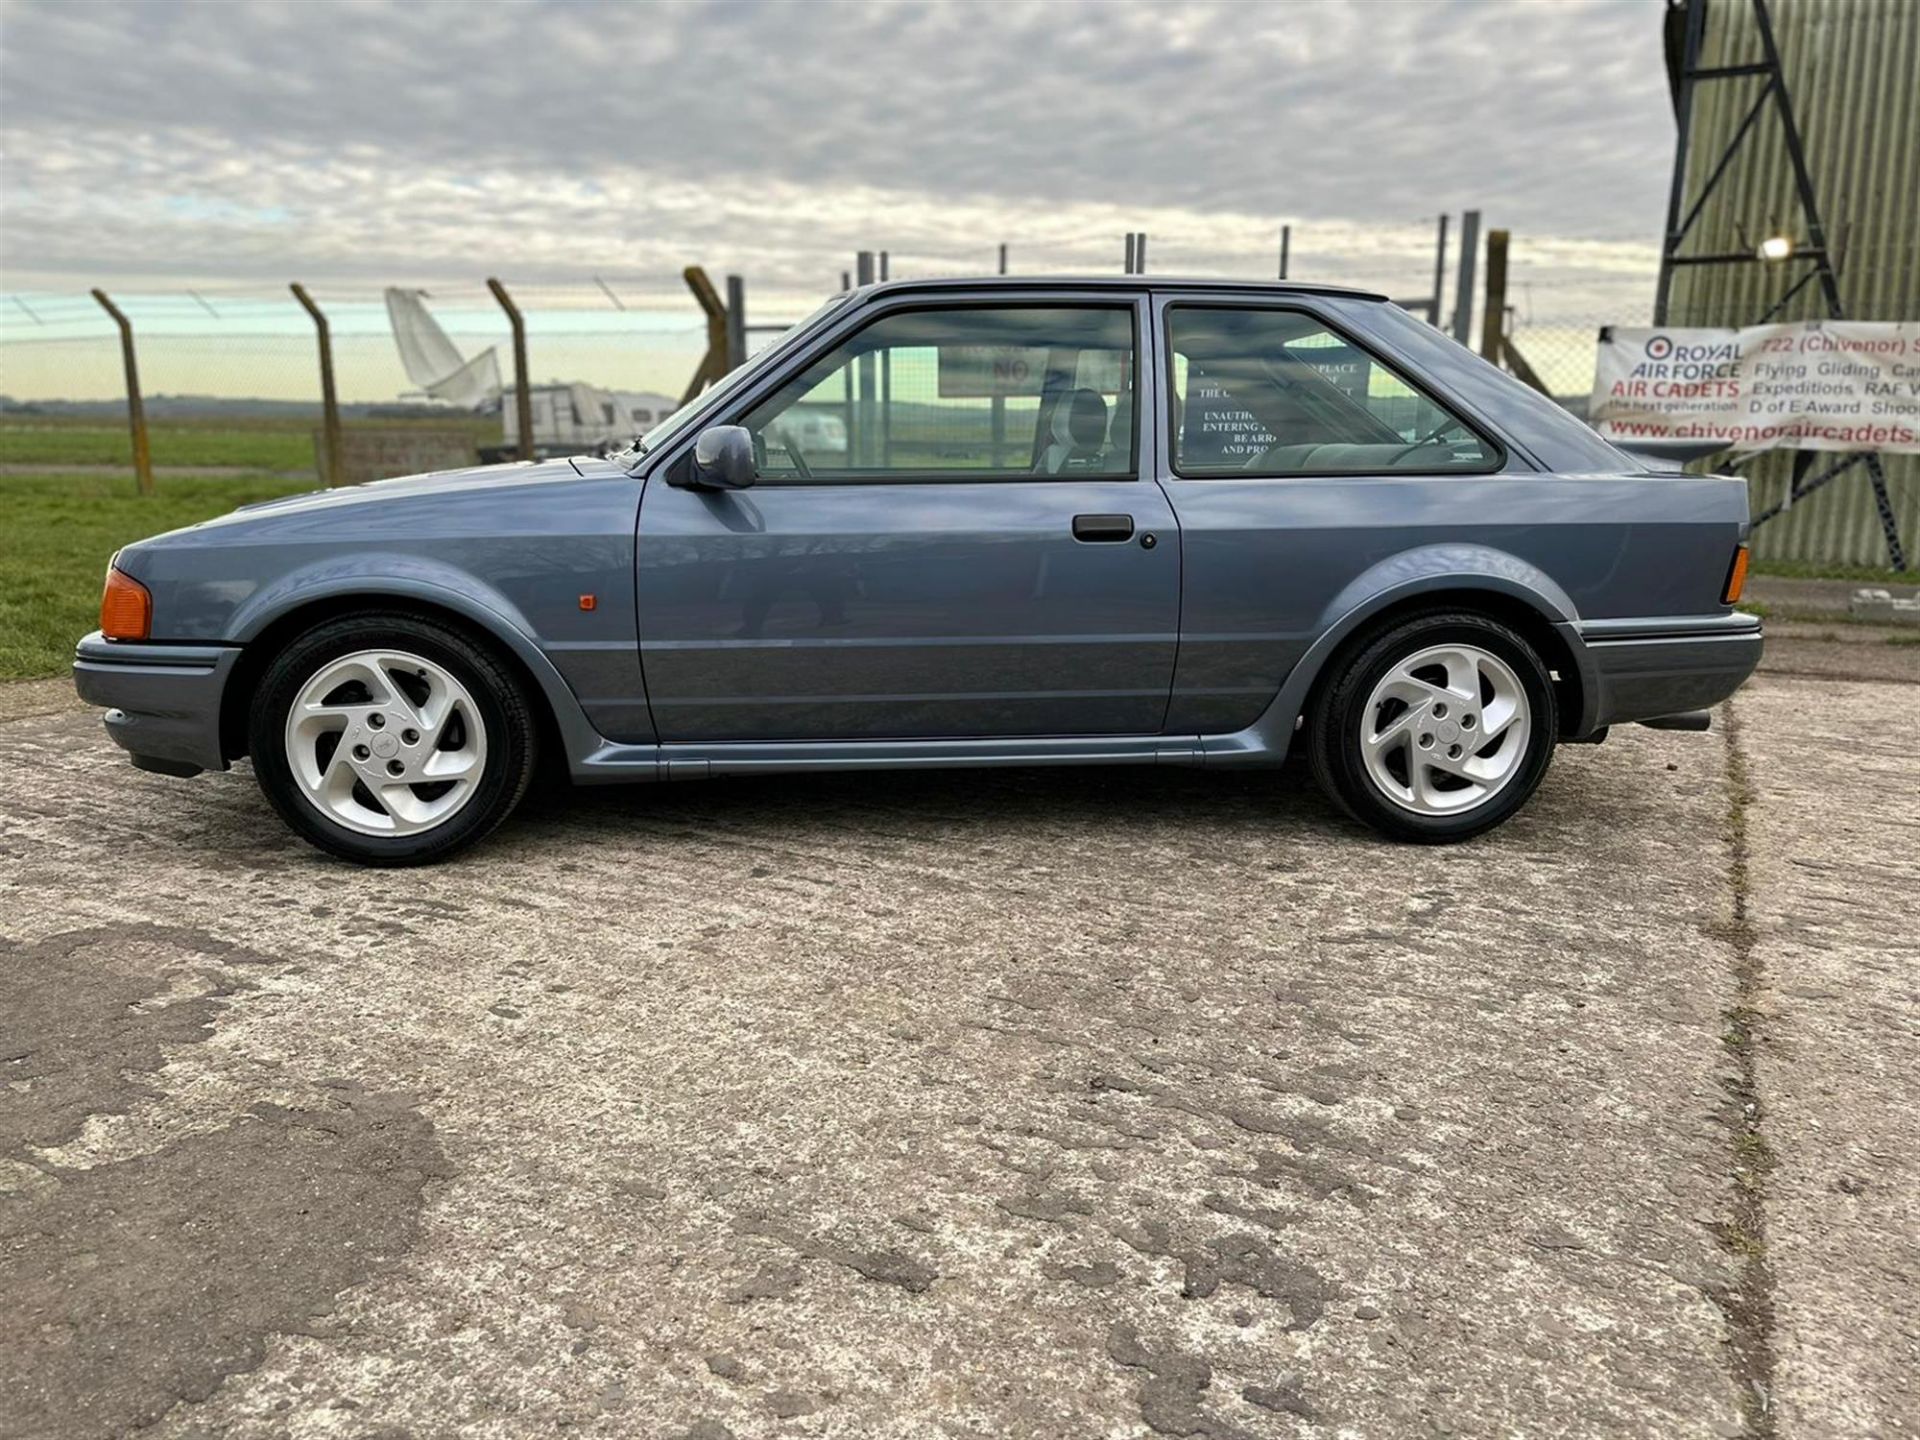 1989 Ford Escort RS Turbo S2 - Image 15 of 20